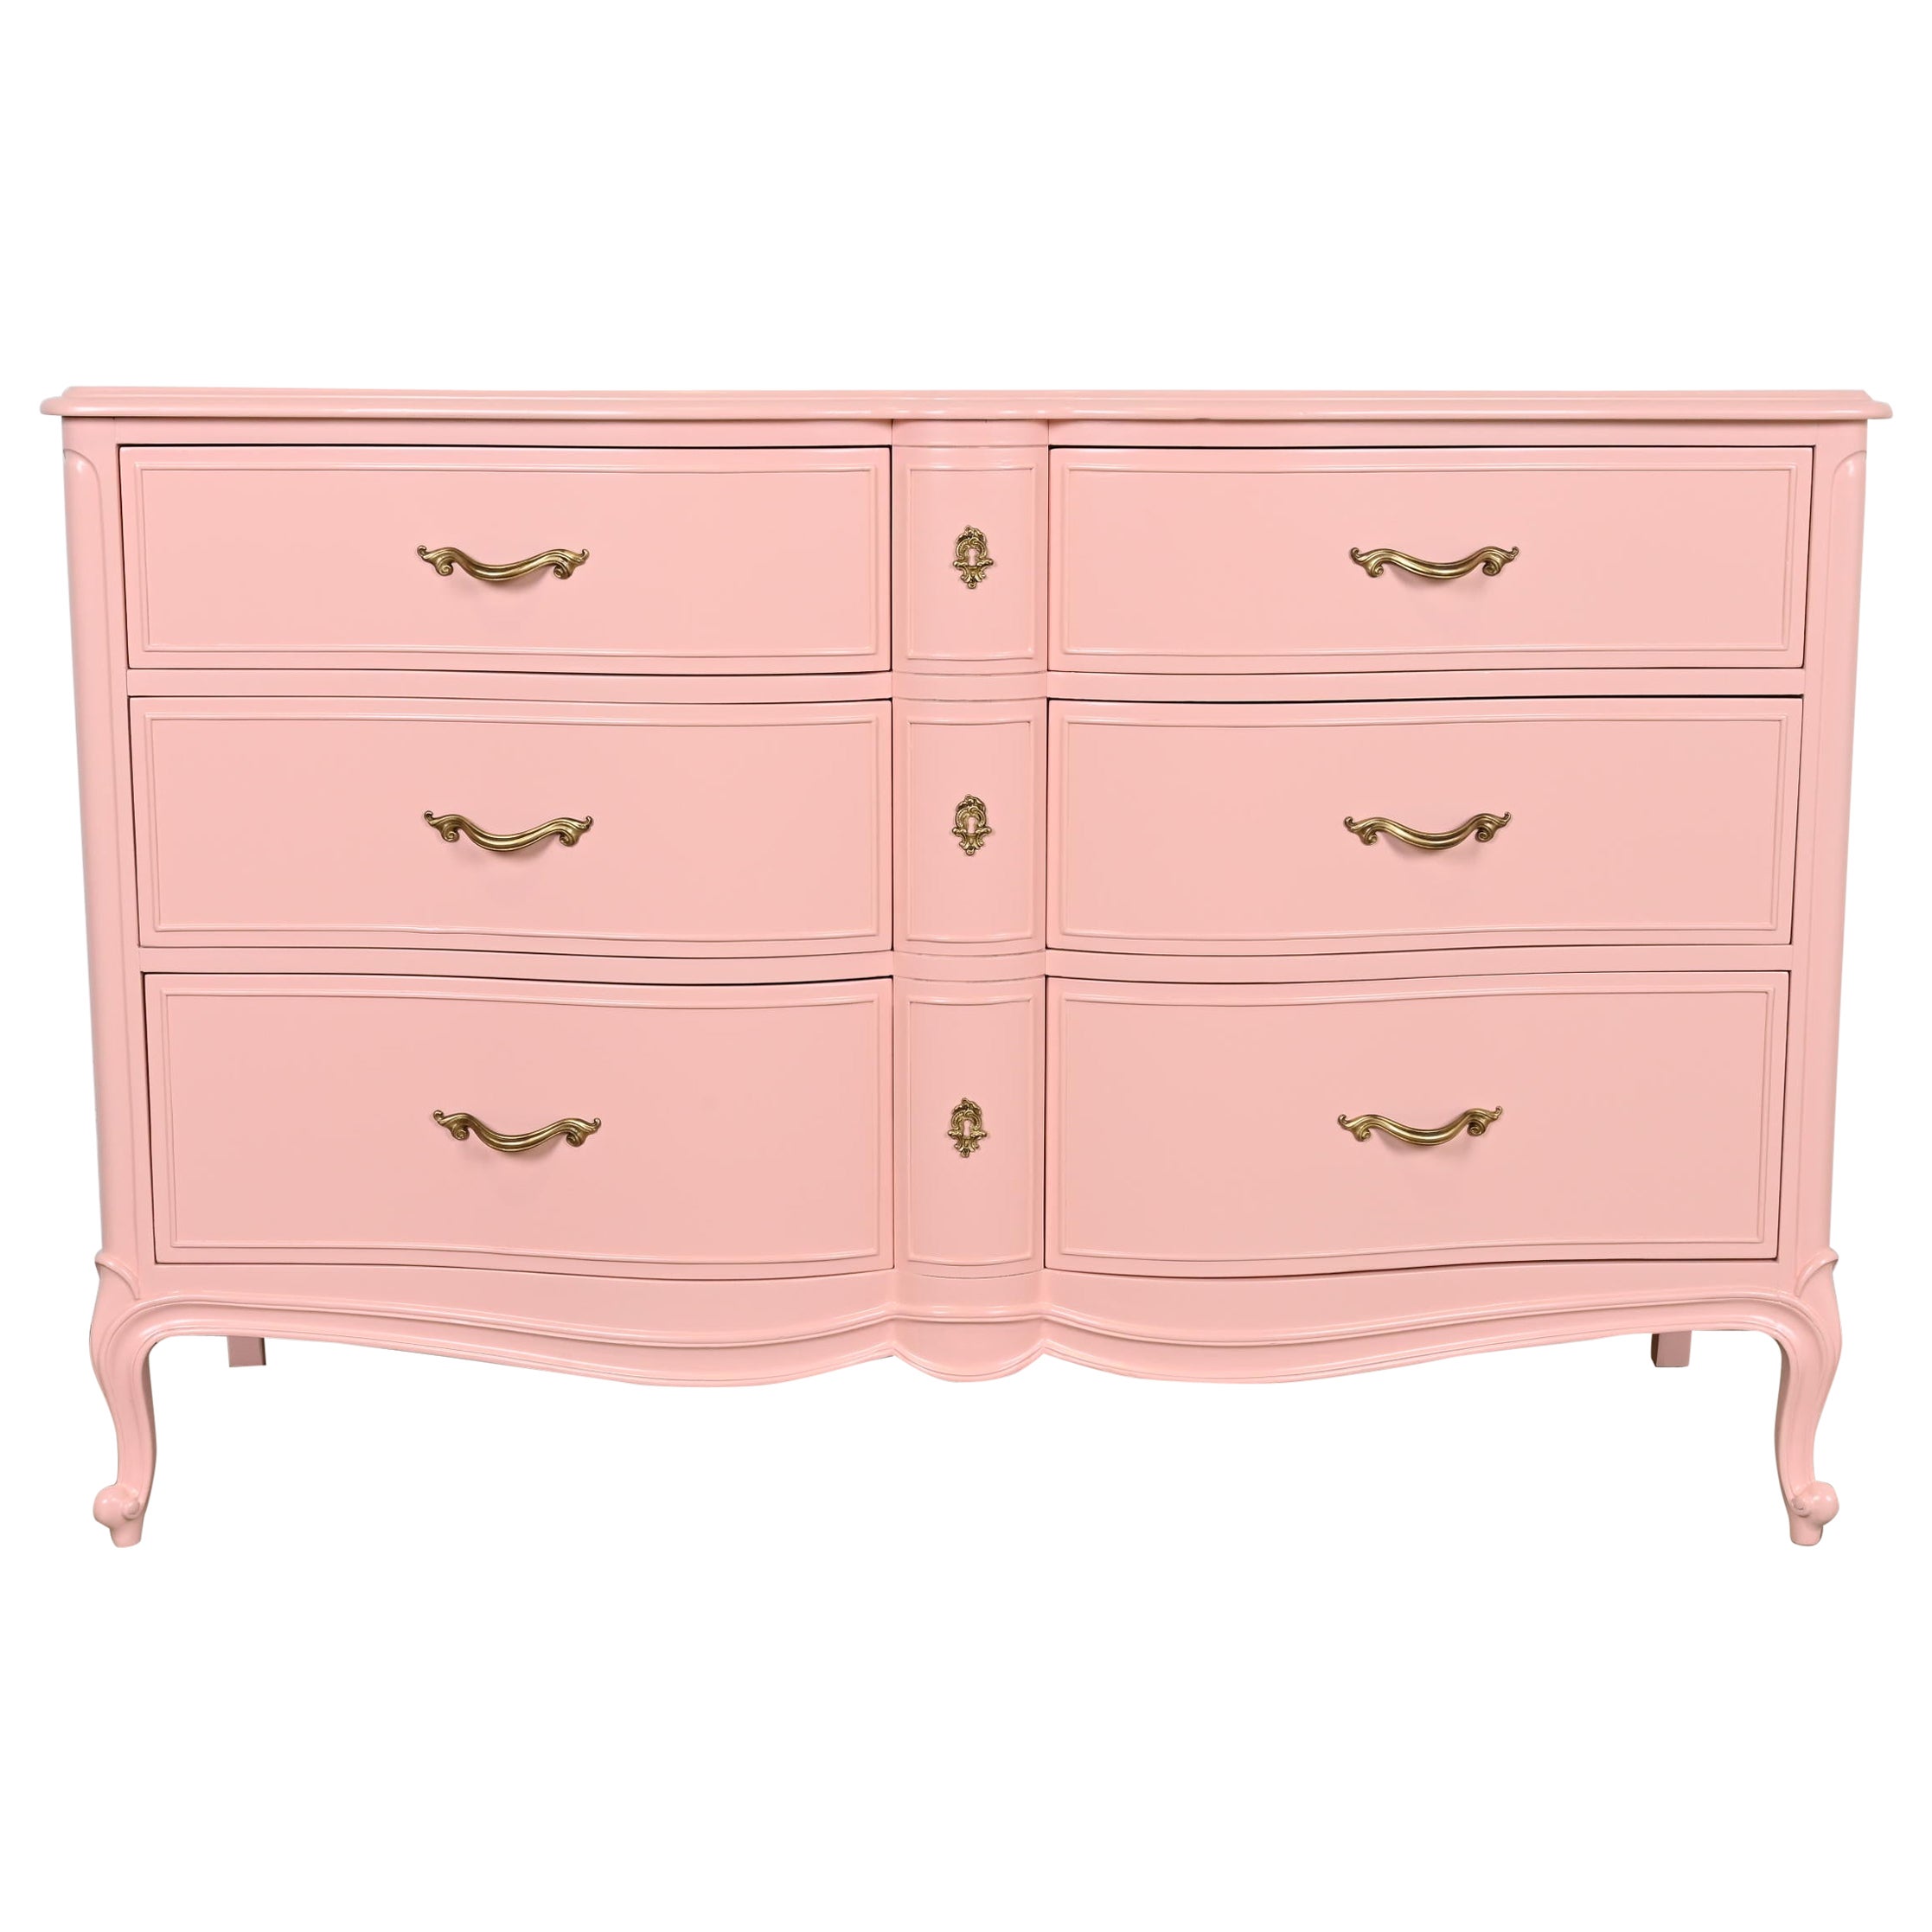 Drexel French Provincial Louis XV Pink Lacquered Dresser, Newly Refinished For Sale